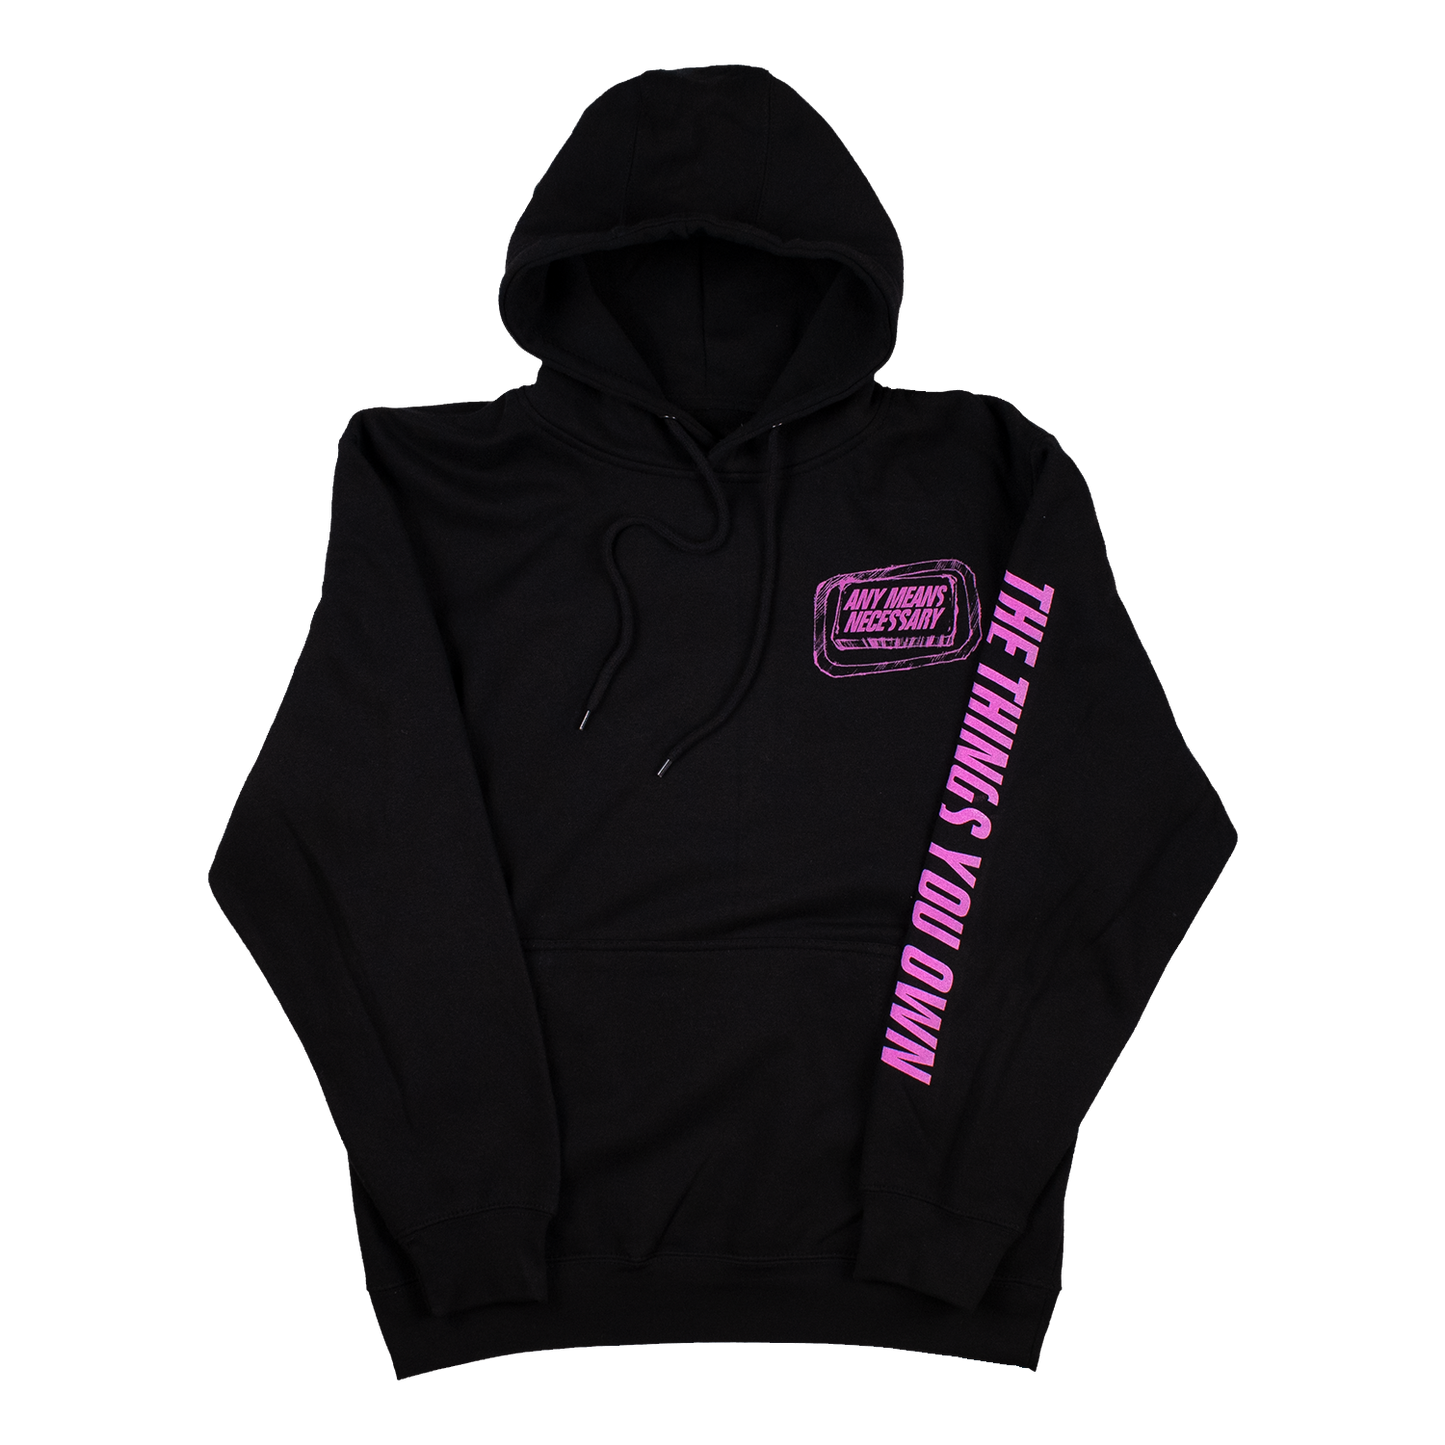 any means necessary shawn coss fight club pullover hoodie black front